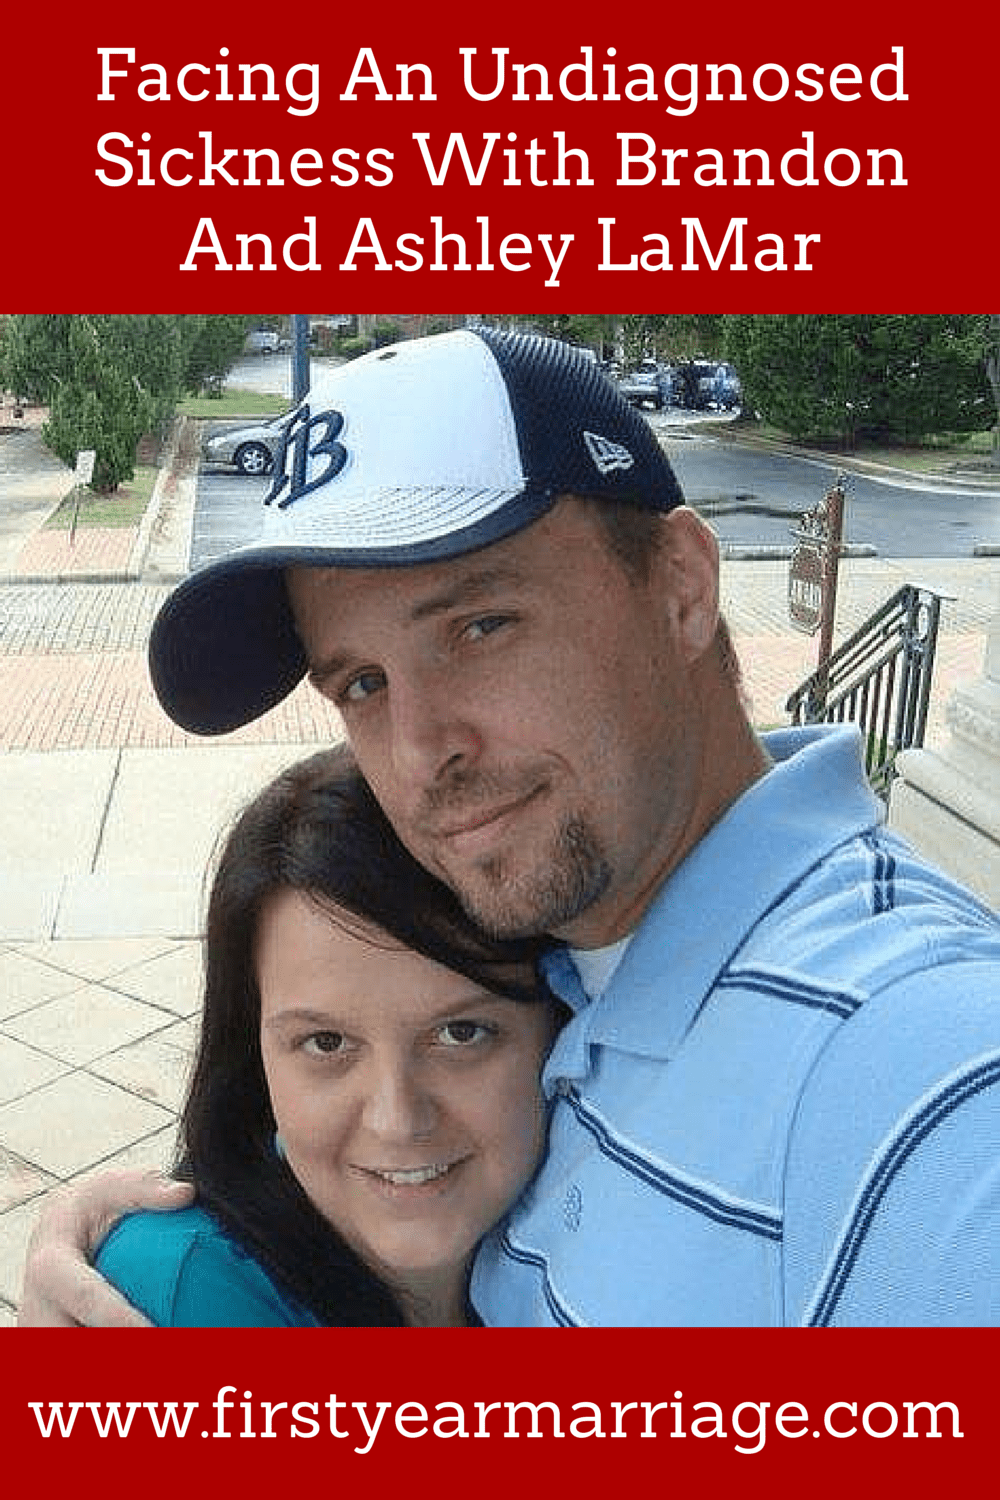 Facing An Undiagnosed Sickness With Brandon And Ashley Lamar